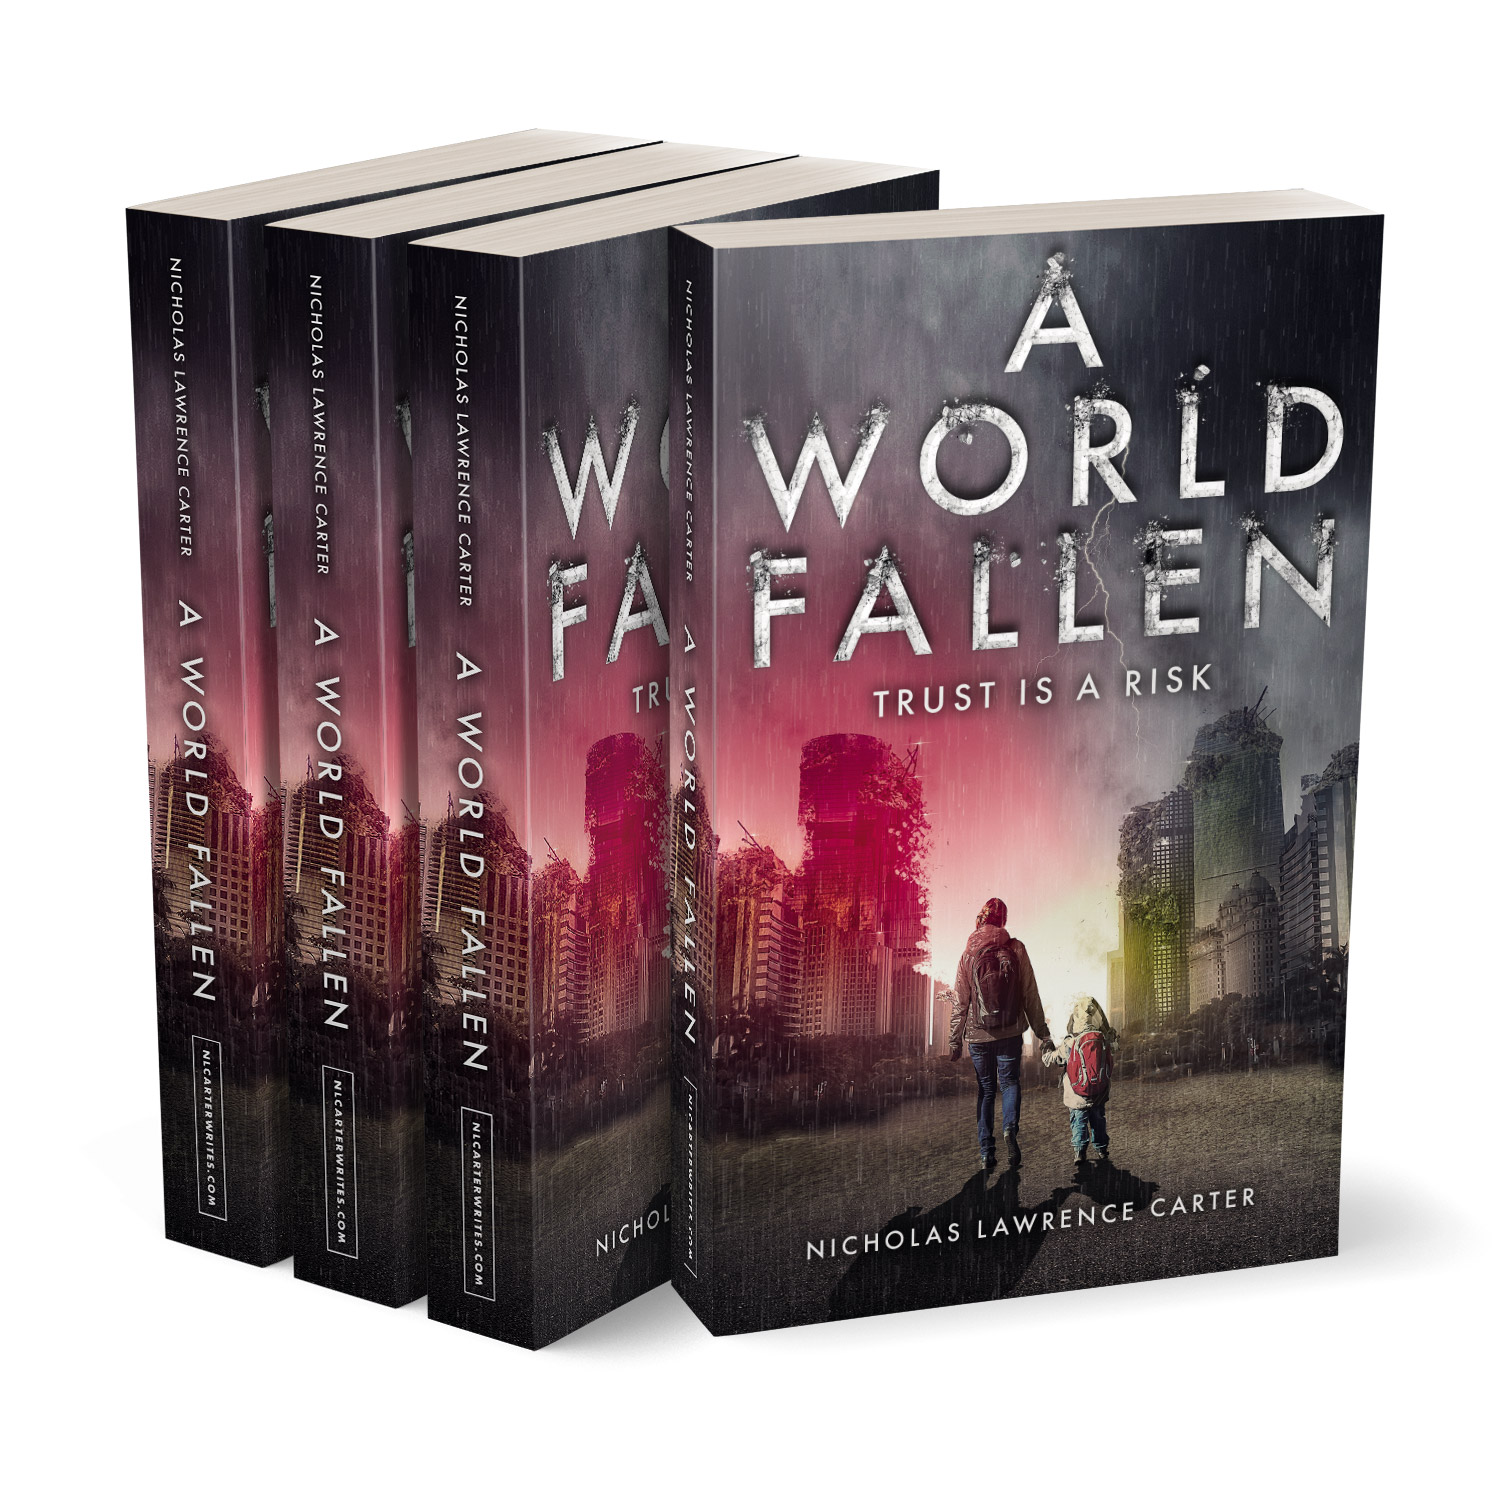 'A World Fallen' is an immersive, post-apocalyse scifi novel. The author is Nicholas Lawrence Carter. The book cover design is by Mark Thomas. To learn more about what Mark could do for your book, please visit coverness.com